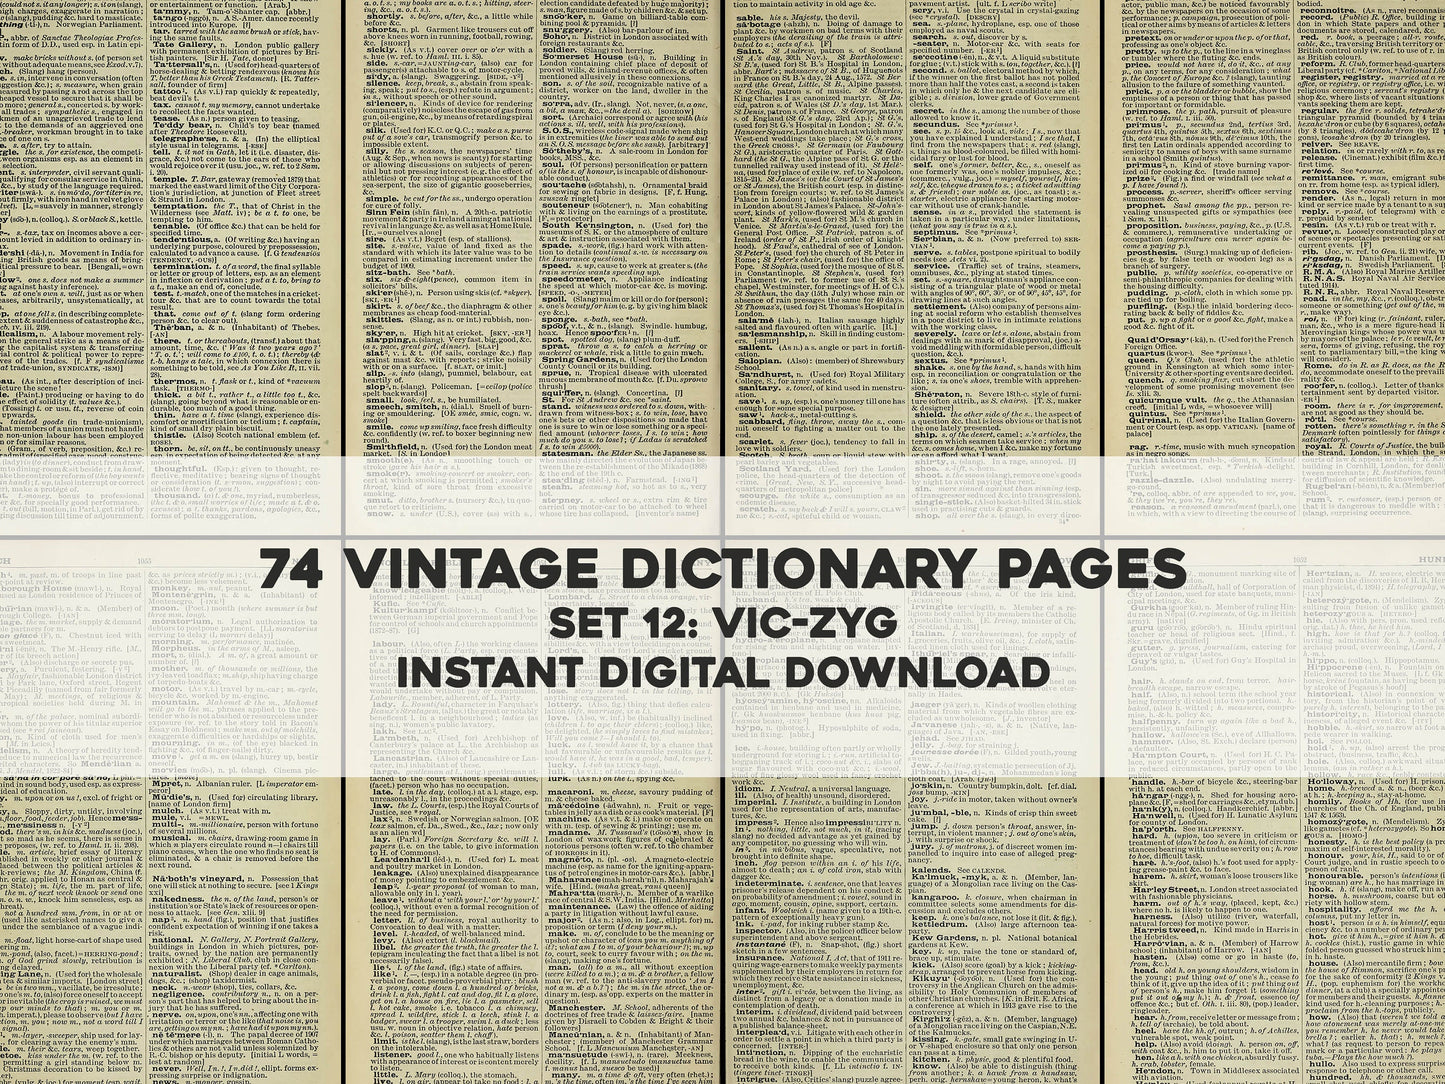 The Concise Oxford Dictionary Set 12 VIC-ZYG [74 Images]